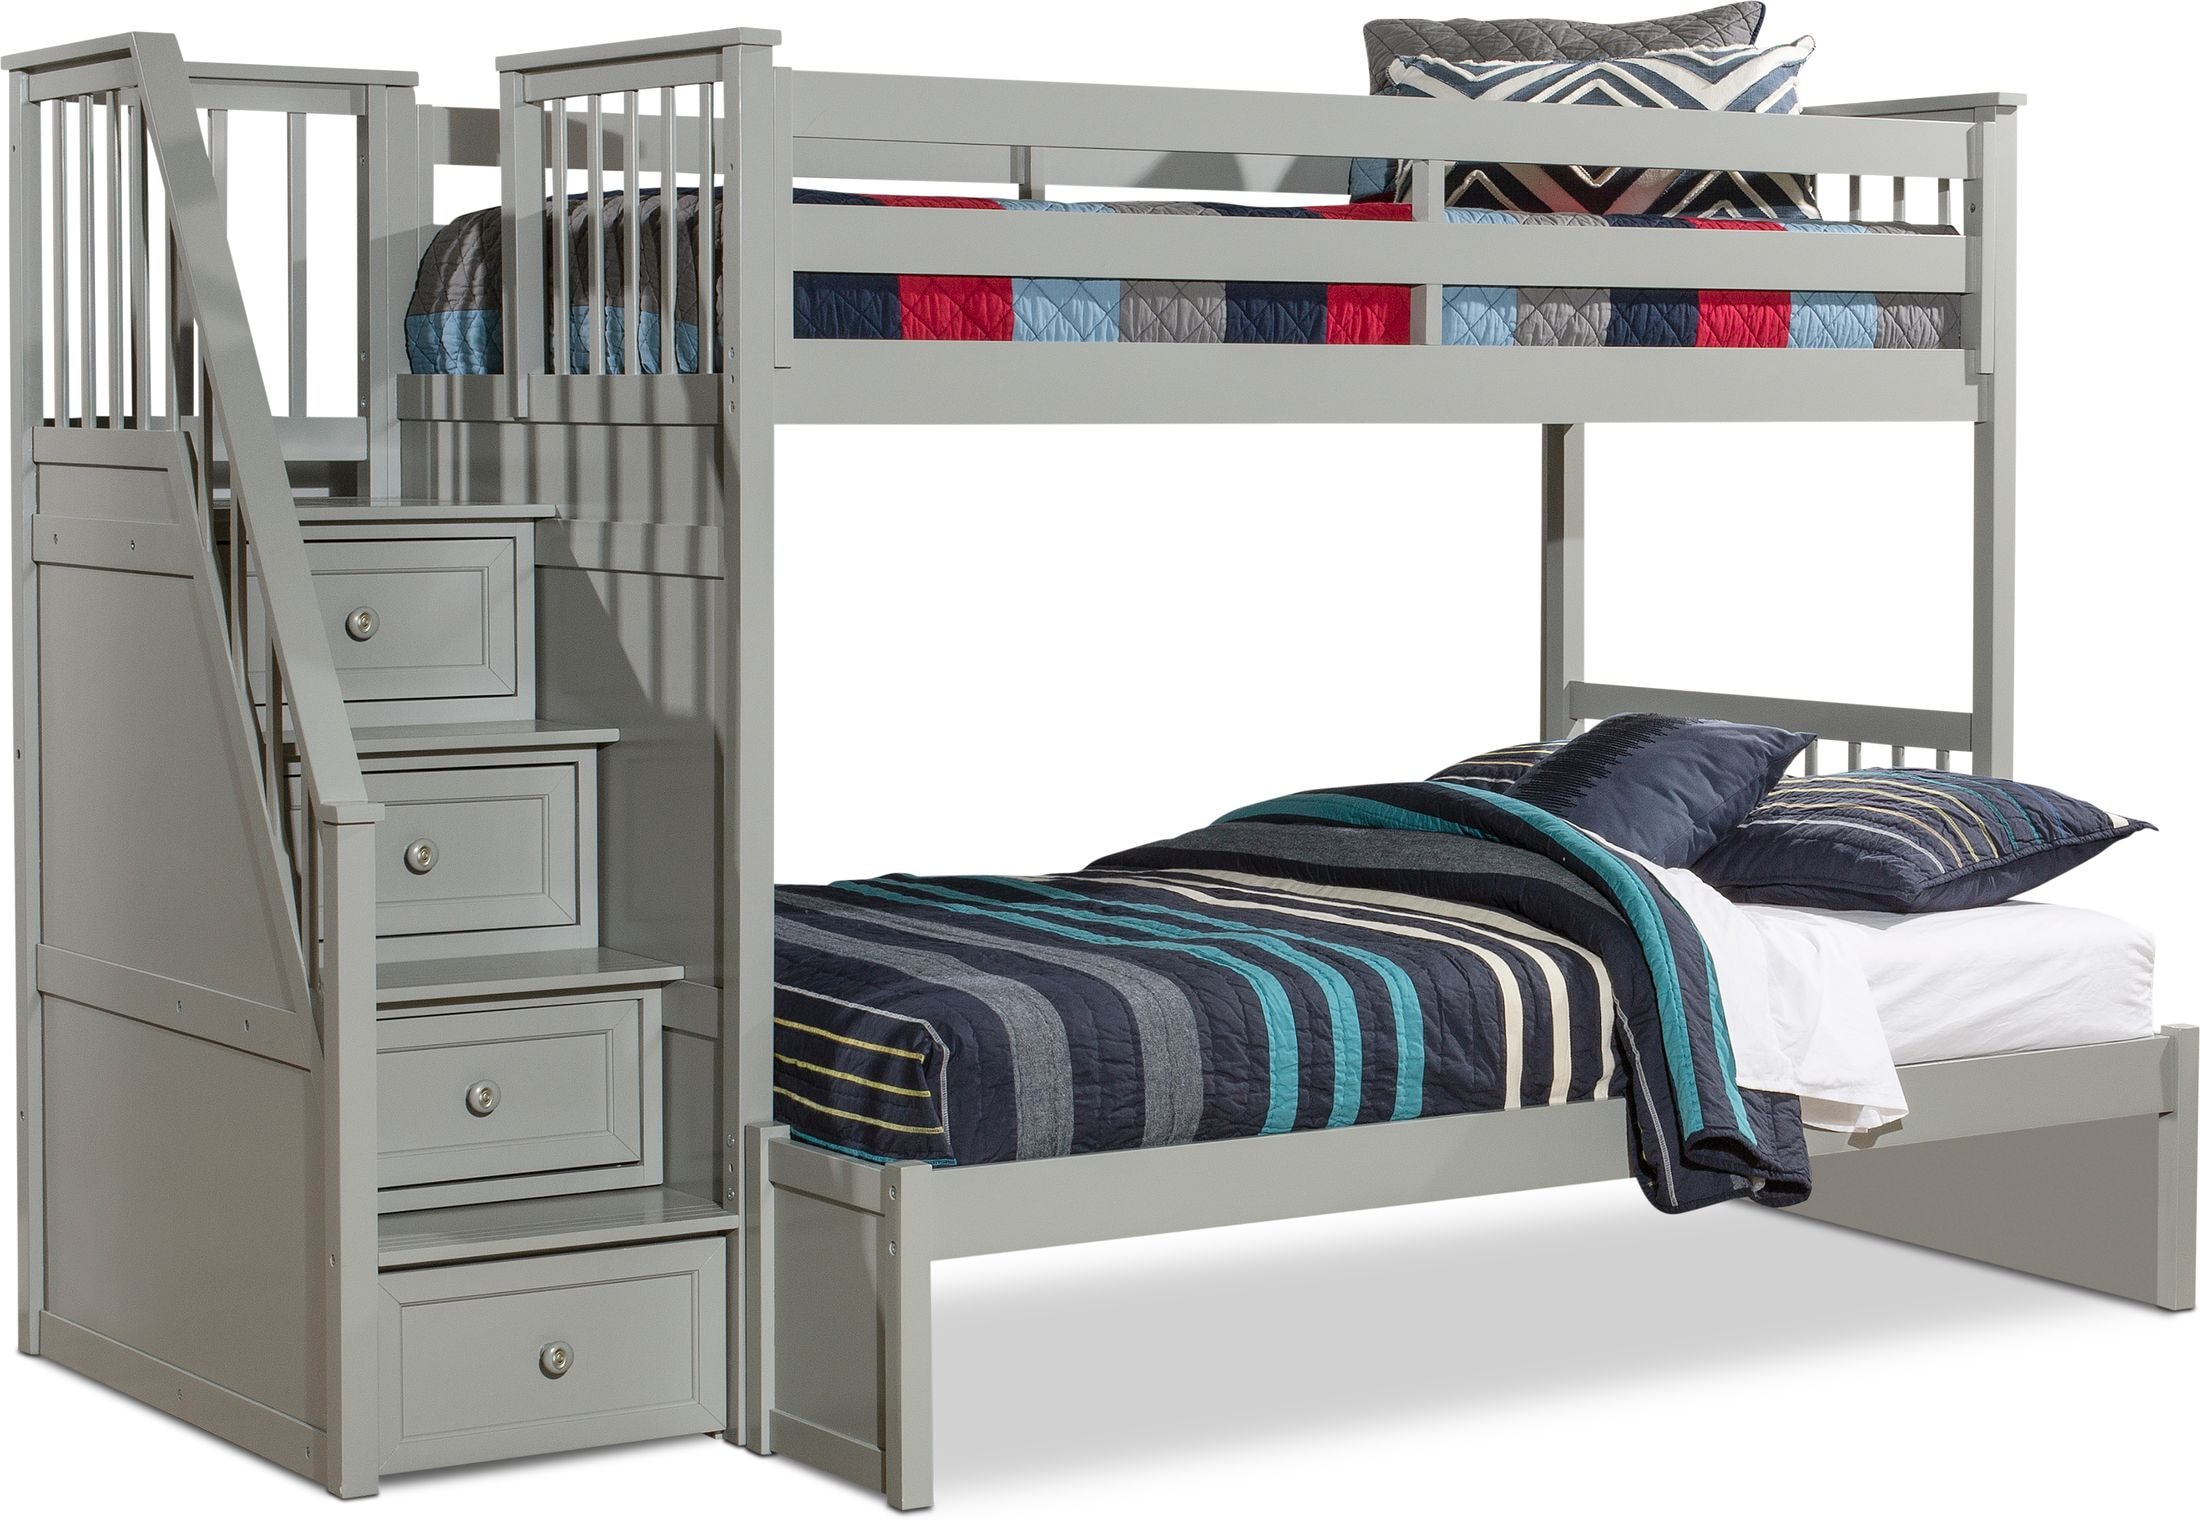 Undefined Value City Furniture, Gray Bunk Beds With Stairs